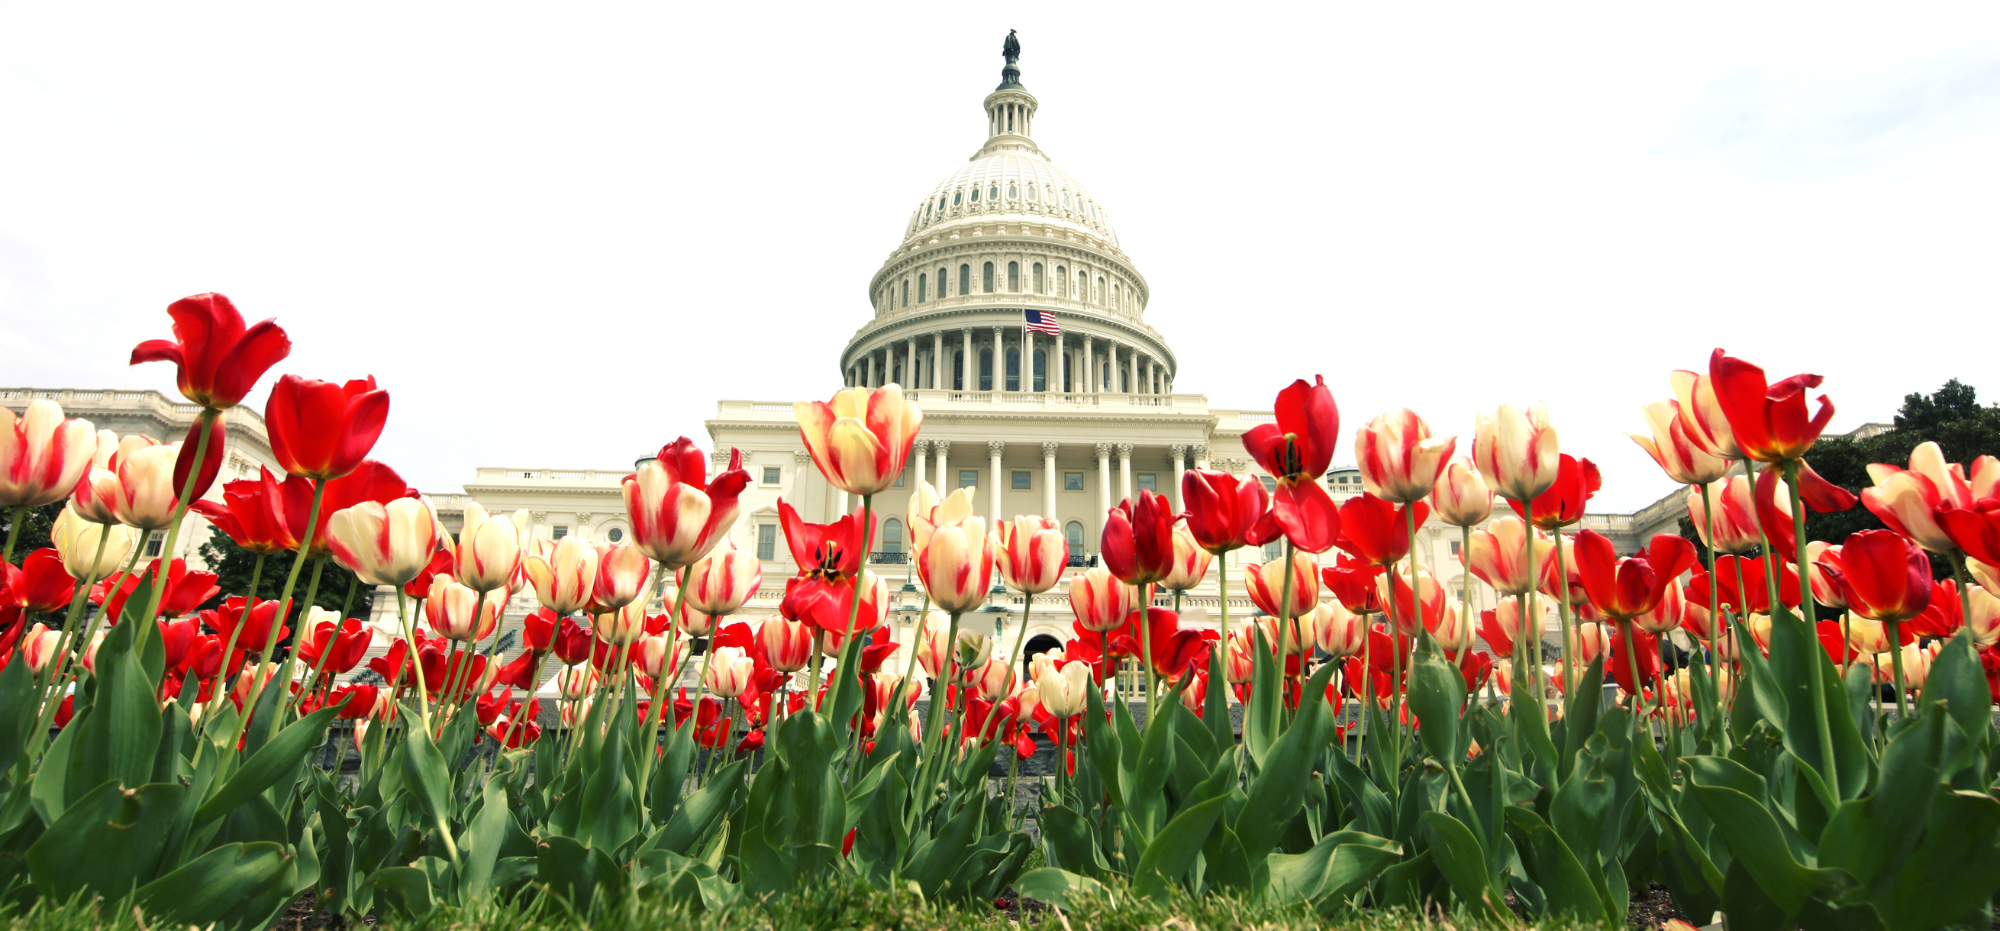 The capitol building in DC is framed by a red and yellow bed of beautiful flowers.